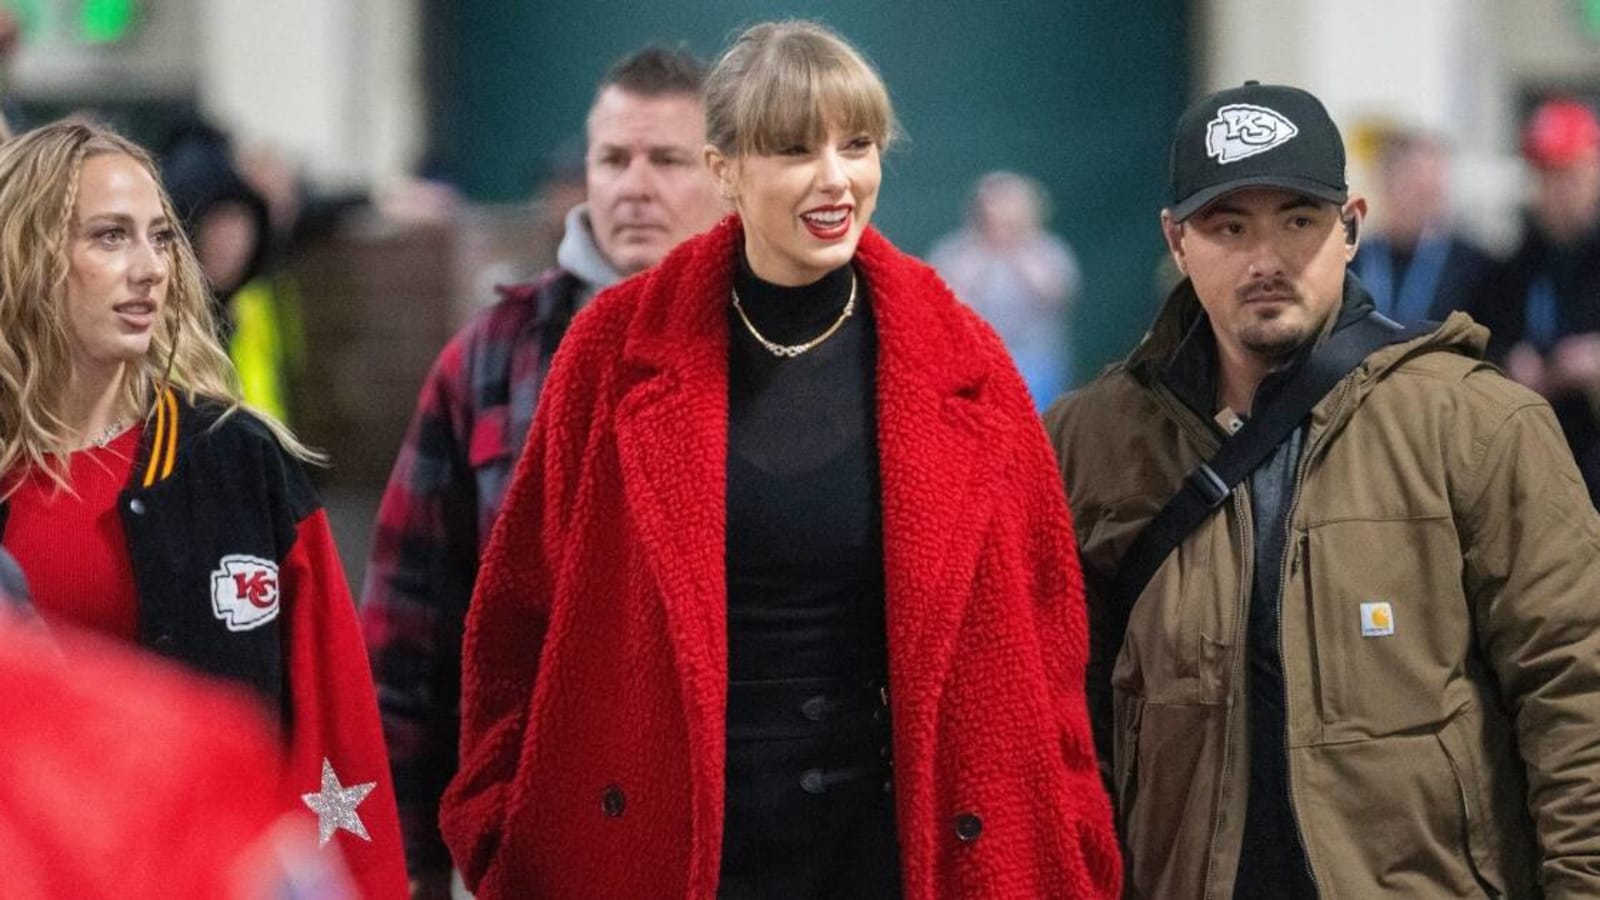 Bills fans boo at the arrival of Taylor Swift for playoff game vs Chiefs